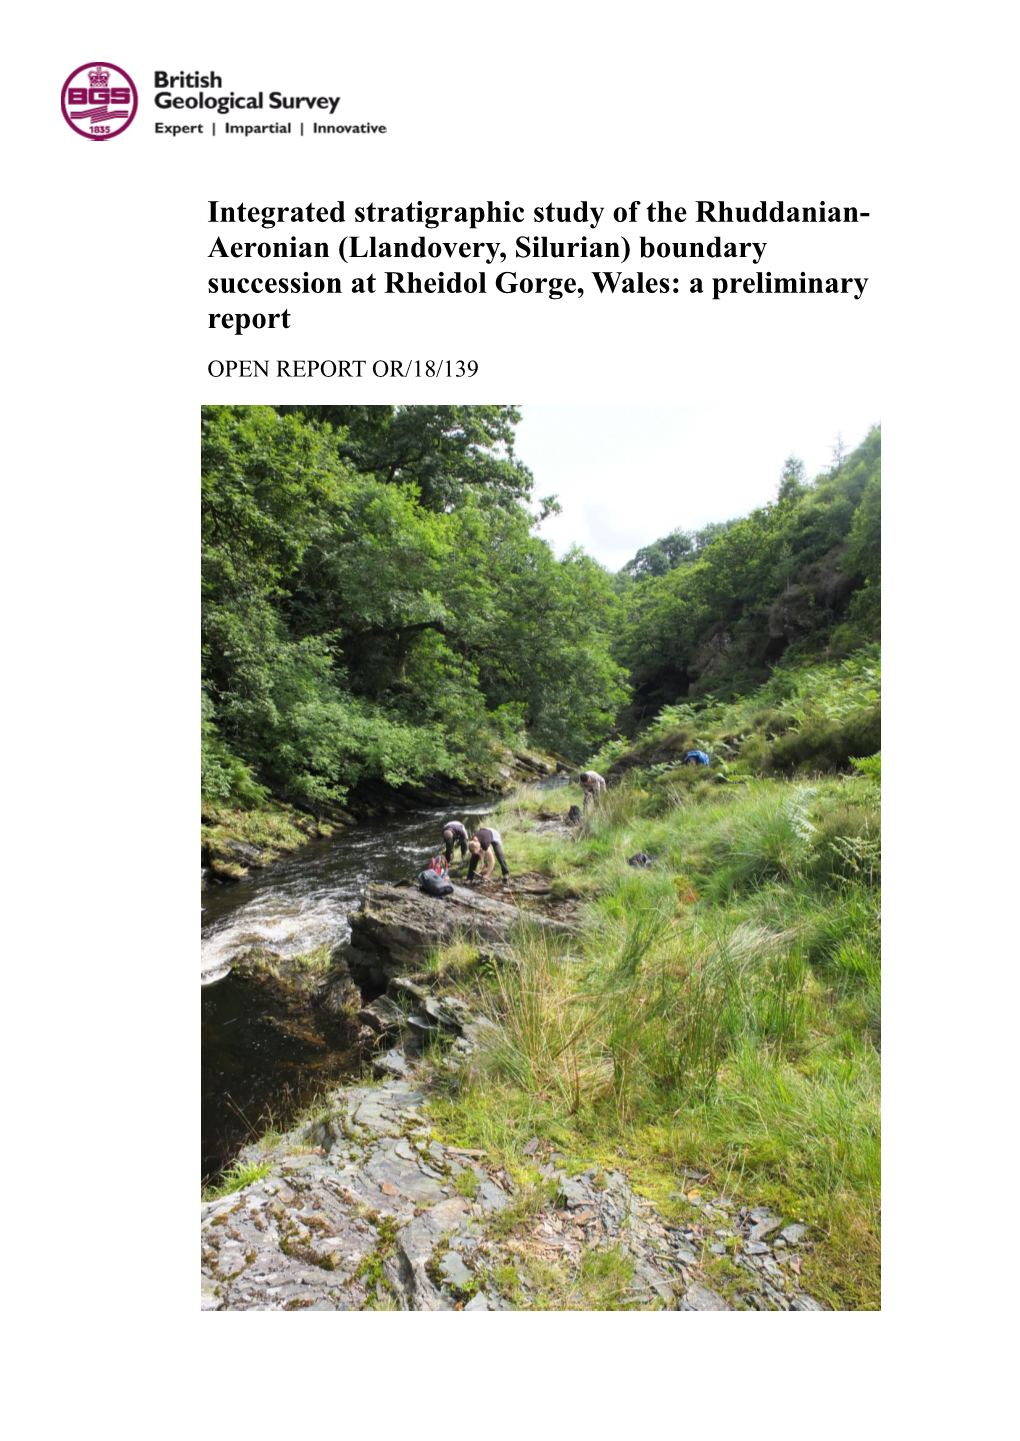 Integrated Stratigraphic Study of the Rhuddanian- Aeronian (Llandovery, Silurian) Boundary Succession at Rheidol Gorge, Wales: a Preliminary Report